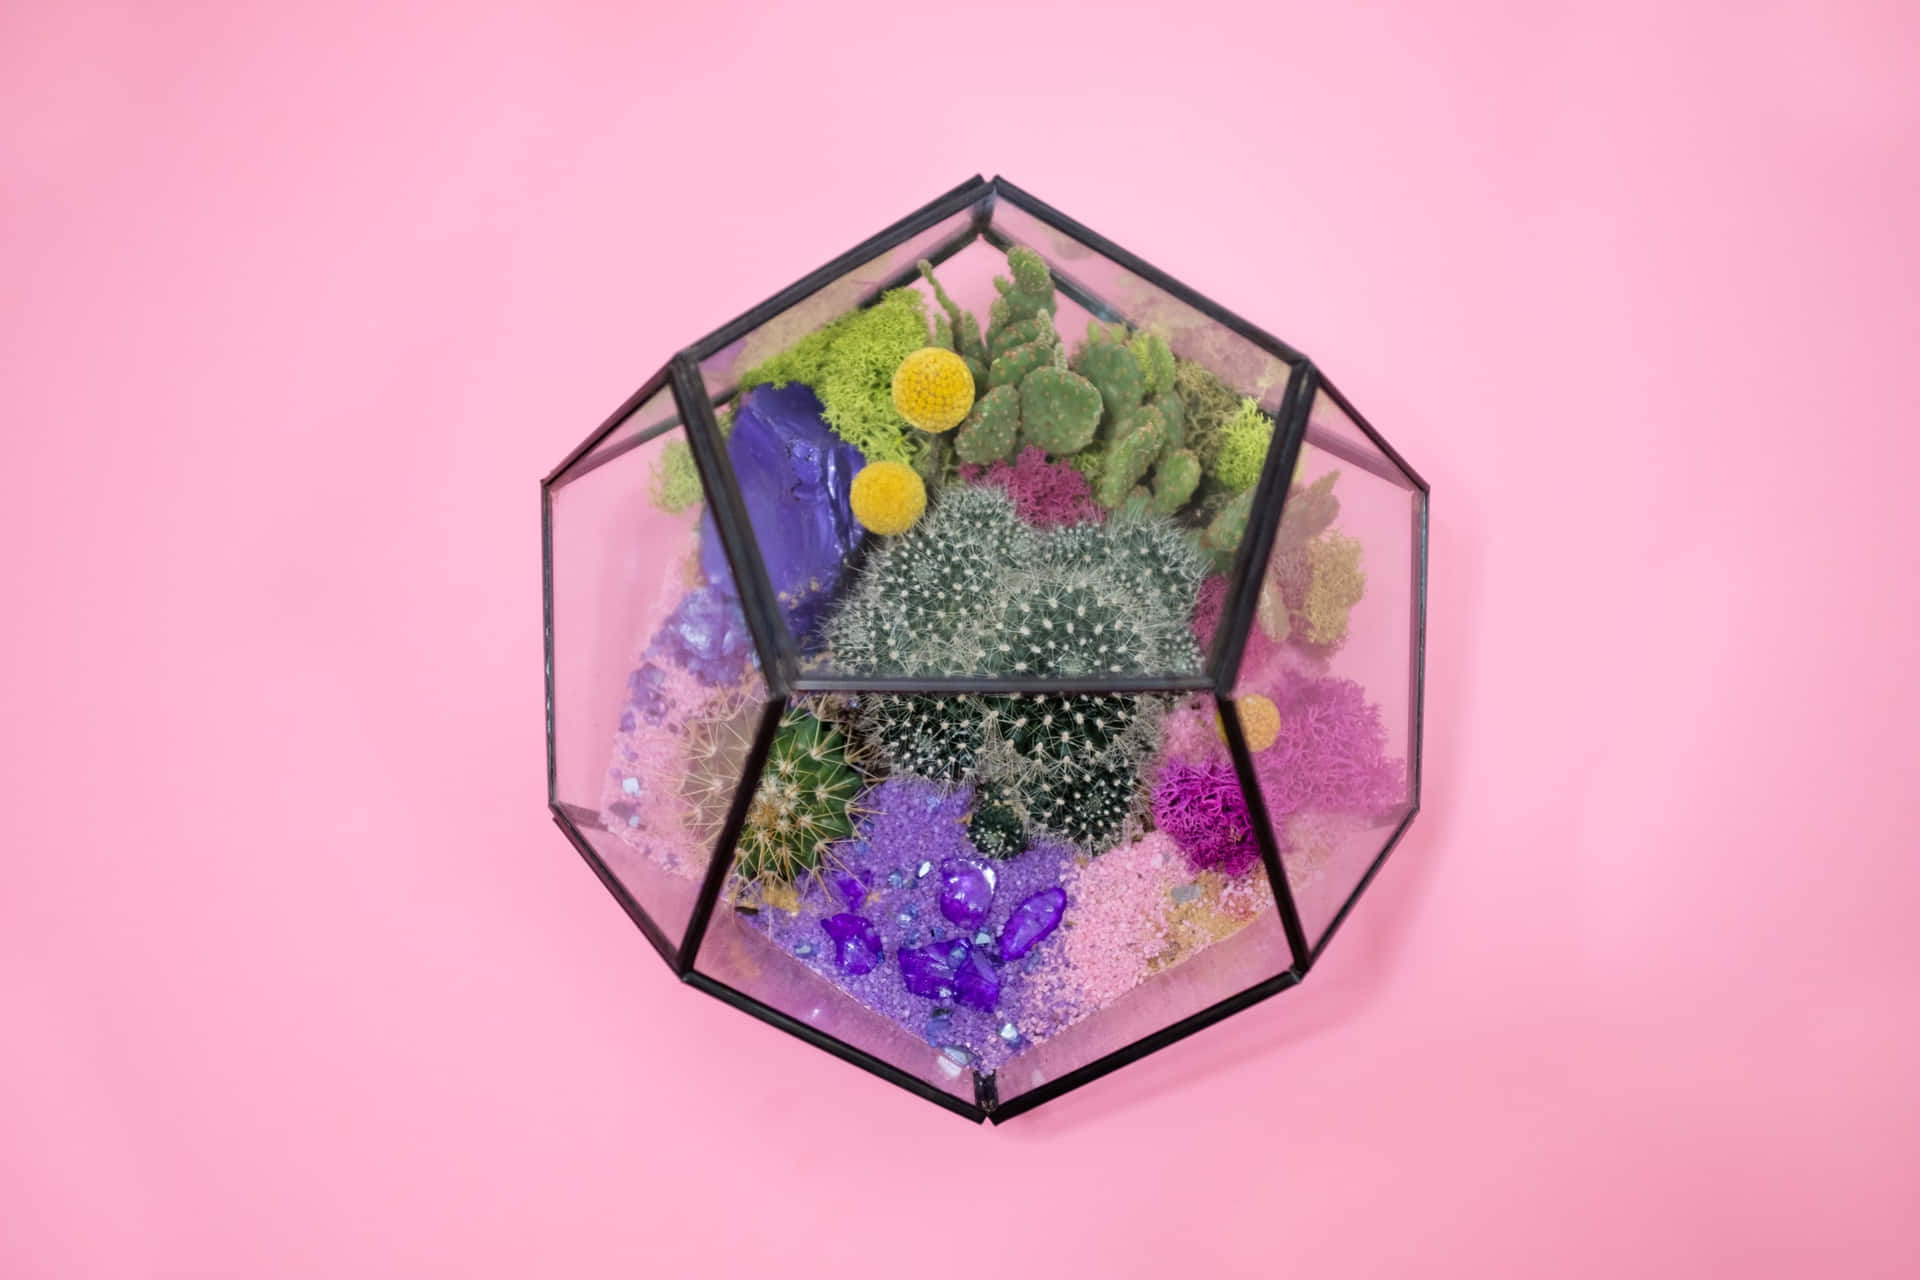 Create your own green world with a beautiful terrarium